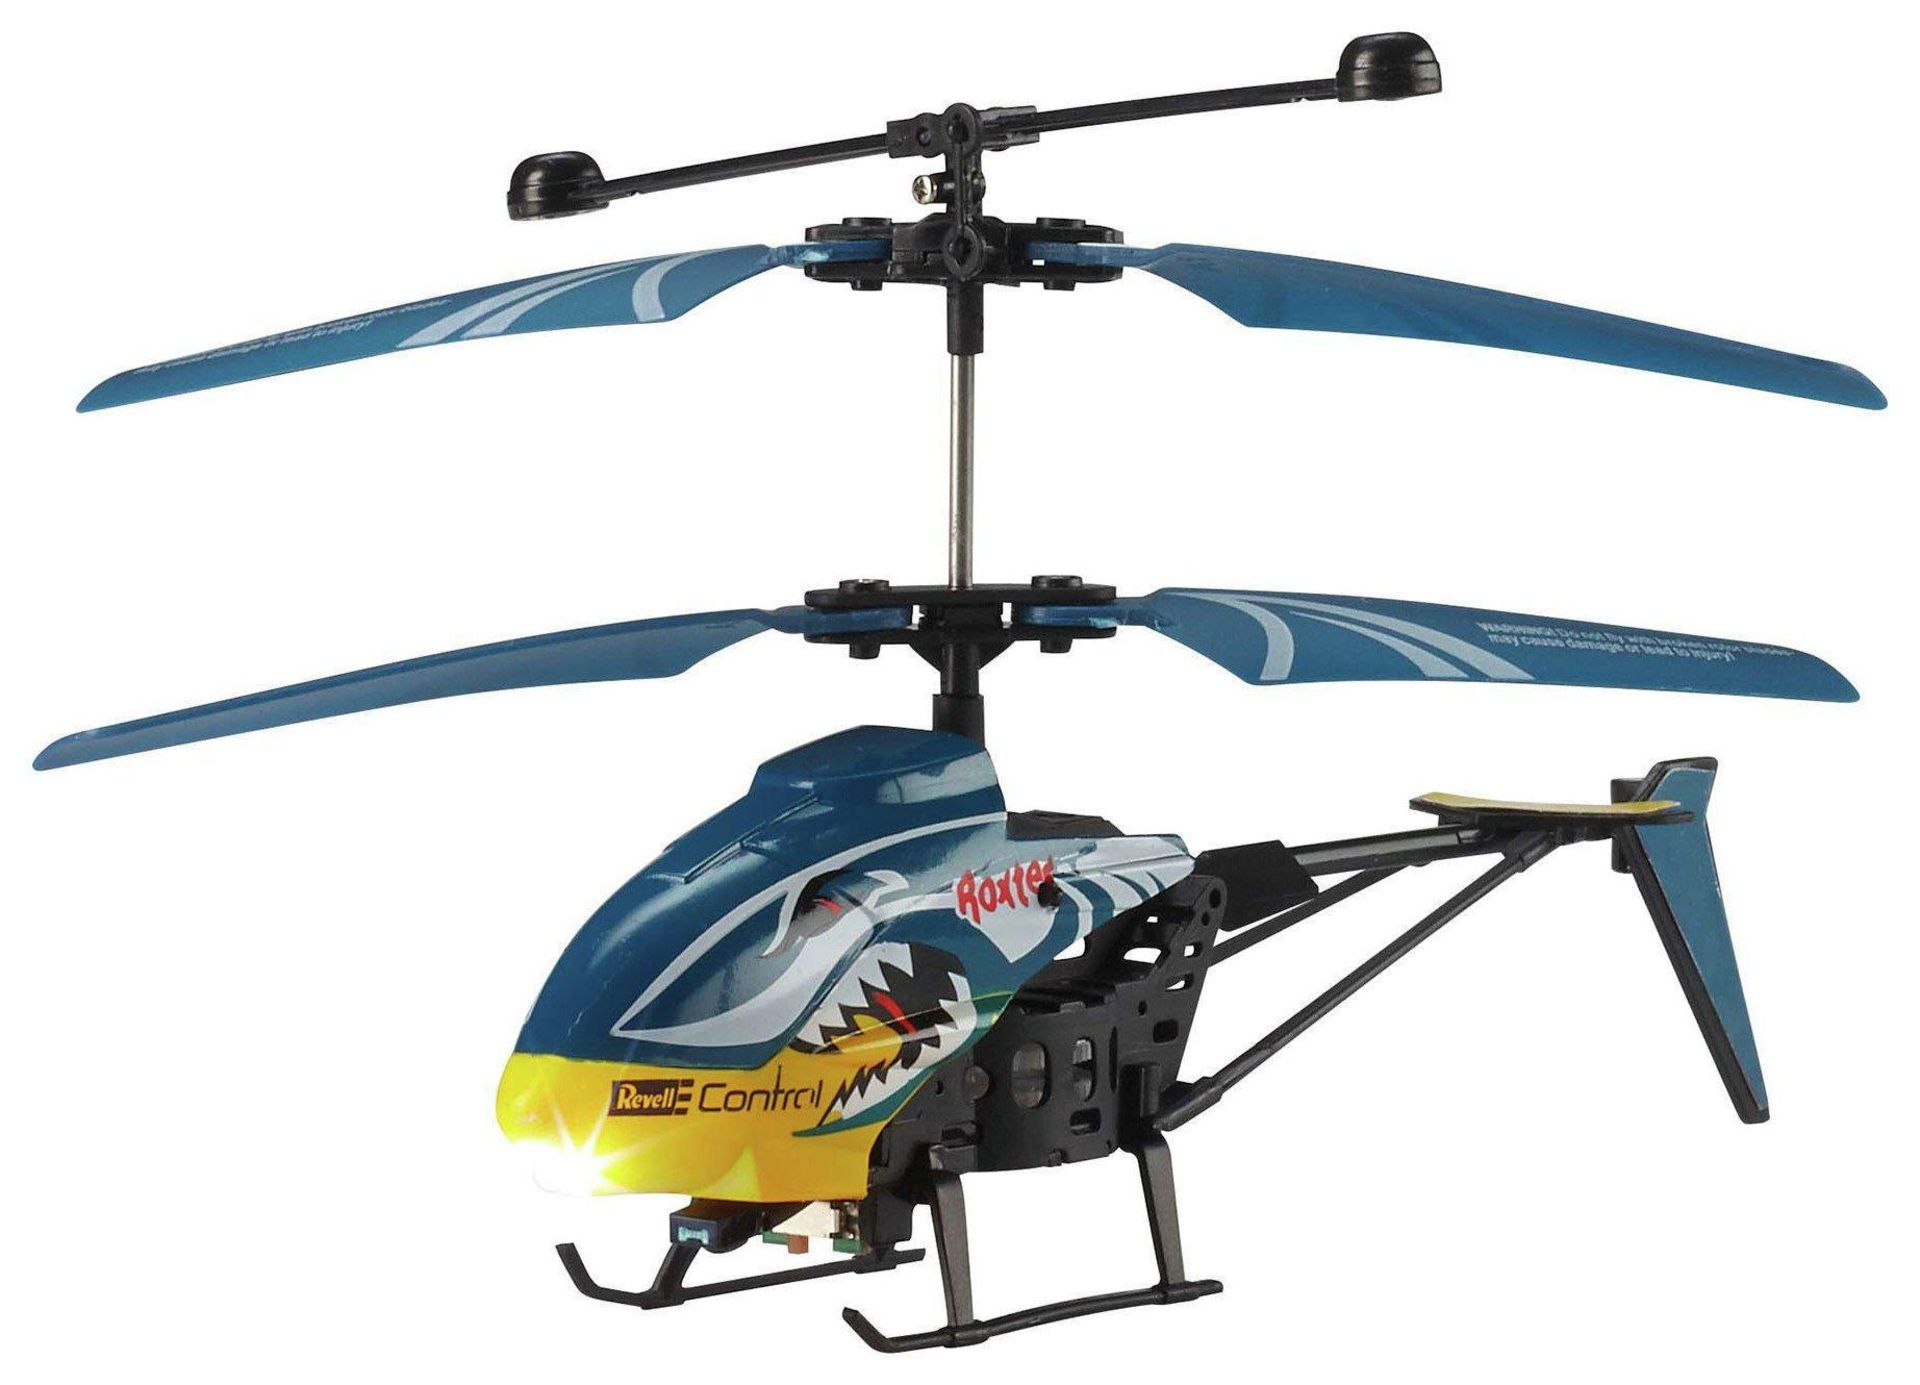 Revell Control RC Roxter Helicopter, £13.00 RRP